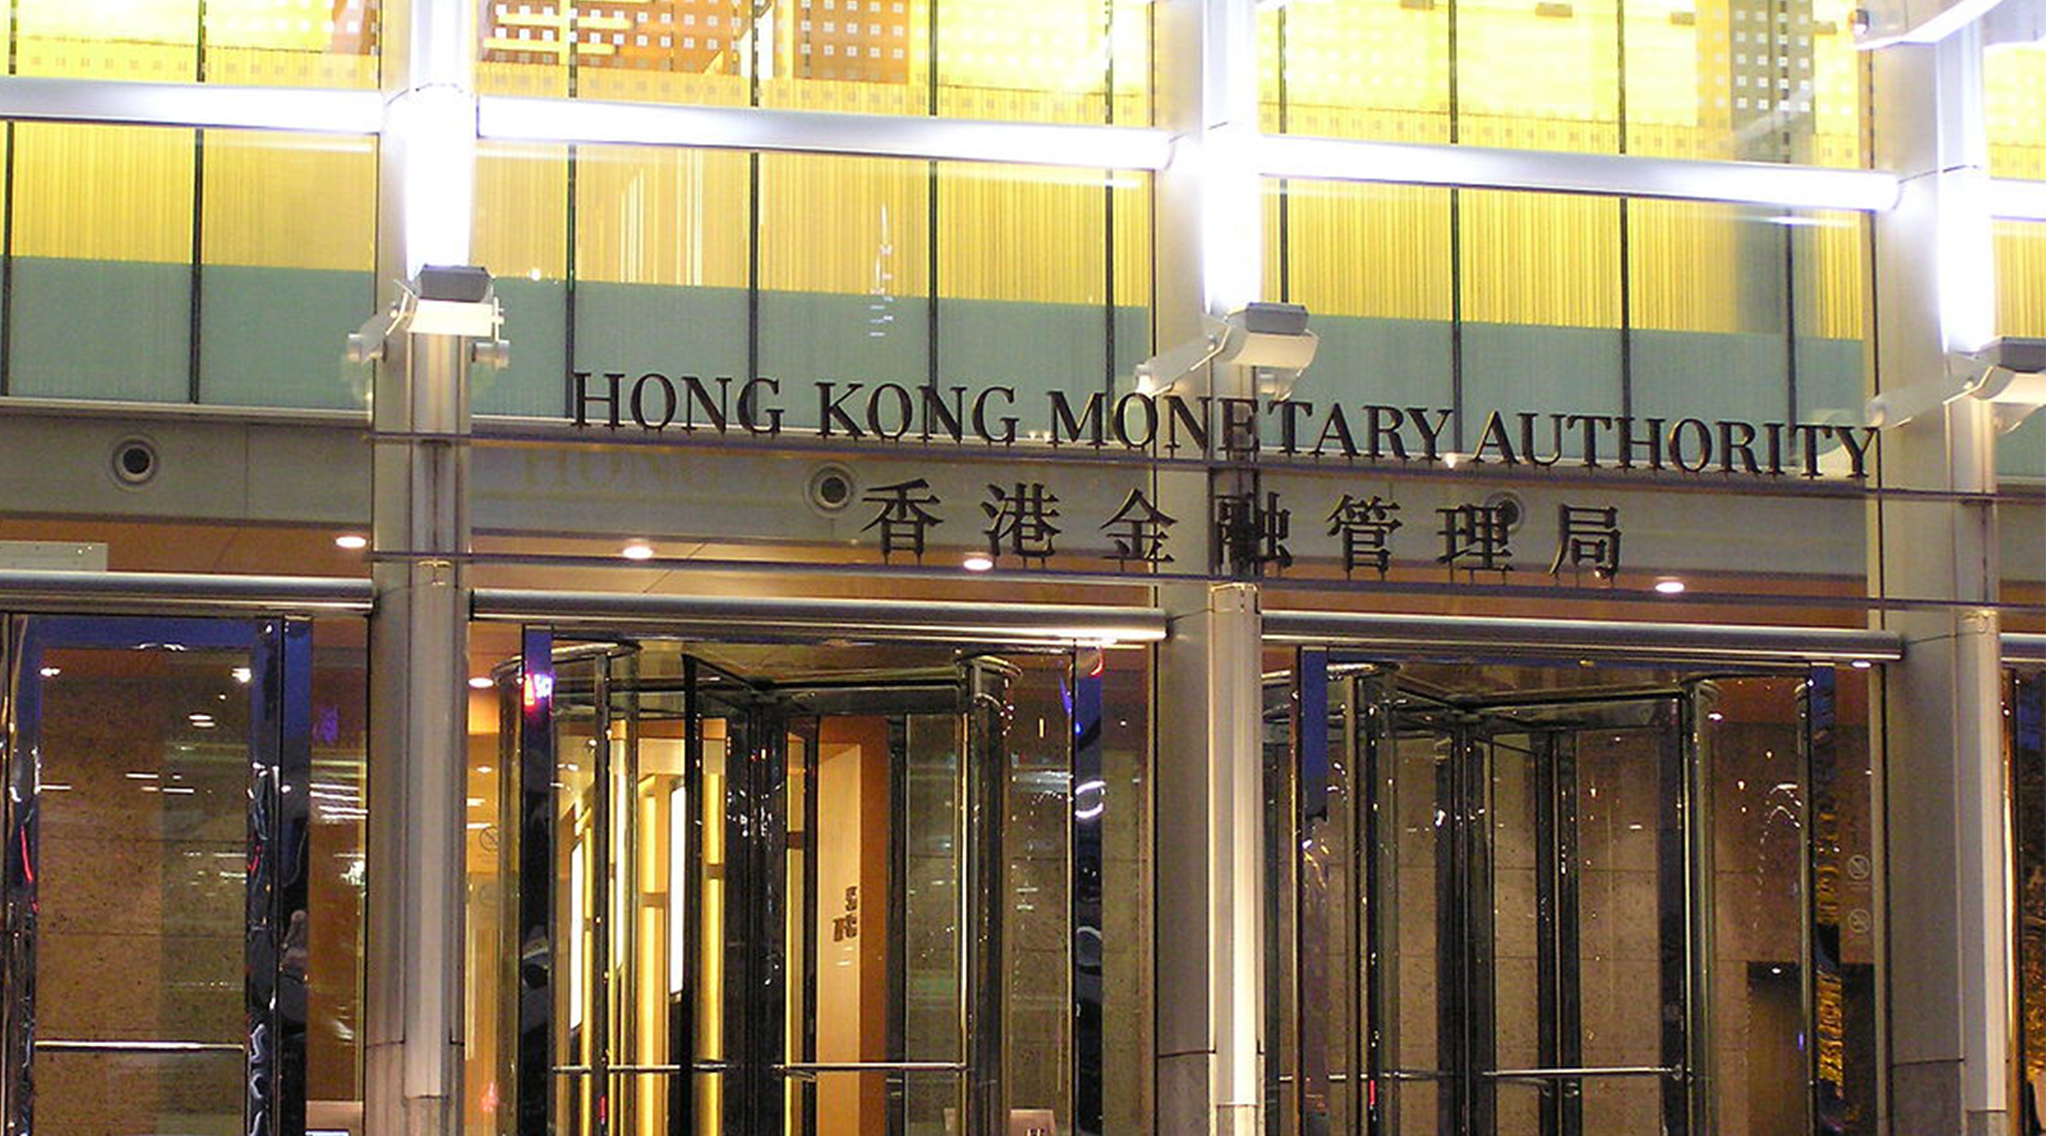 Central-Banks-of-China-and-UAE-Joins-Hong-Kong-Thailands-Digital-Currency-Project